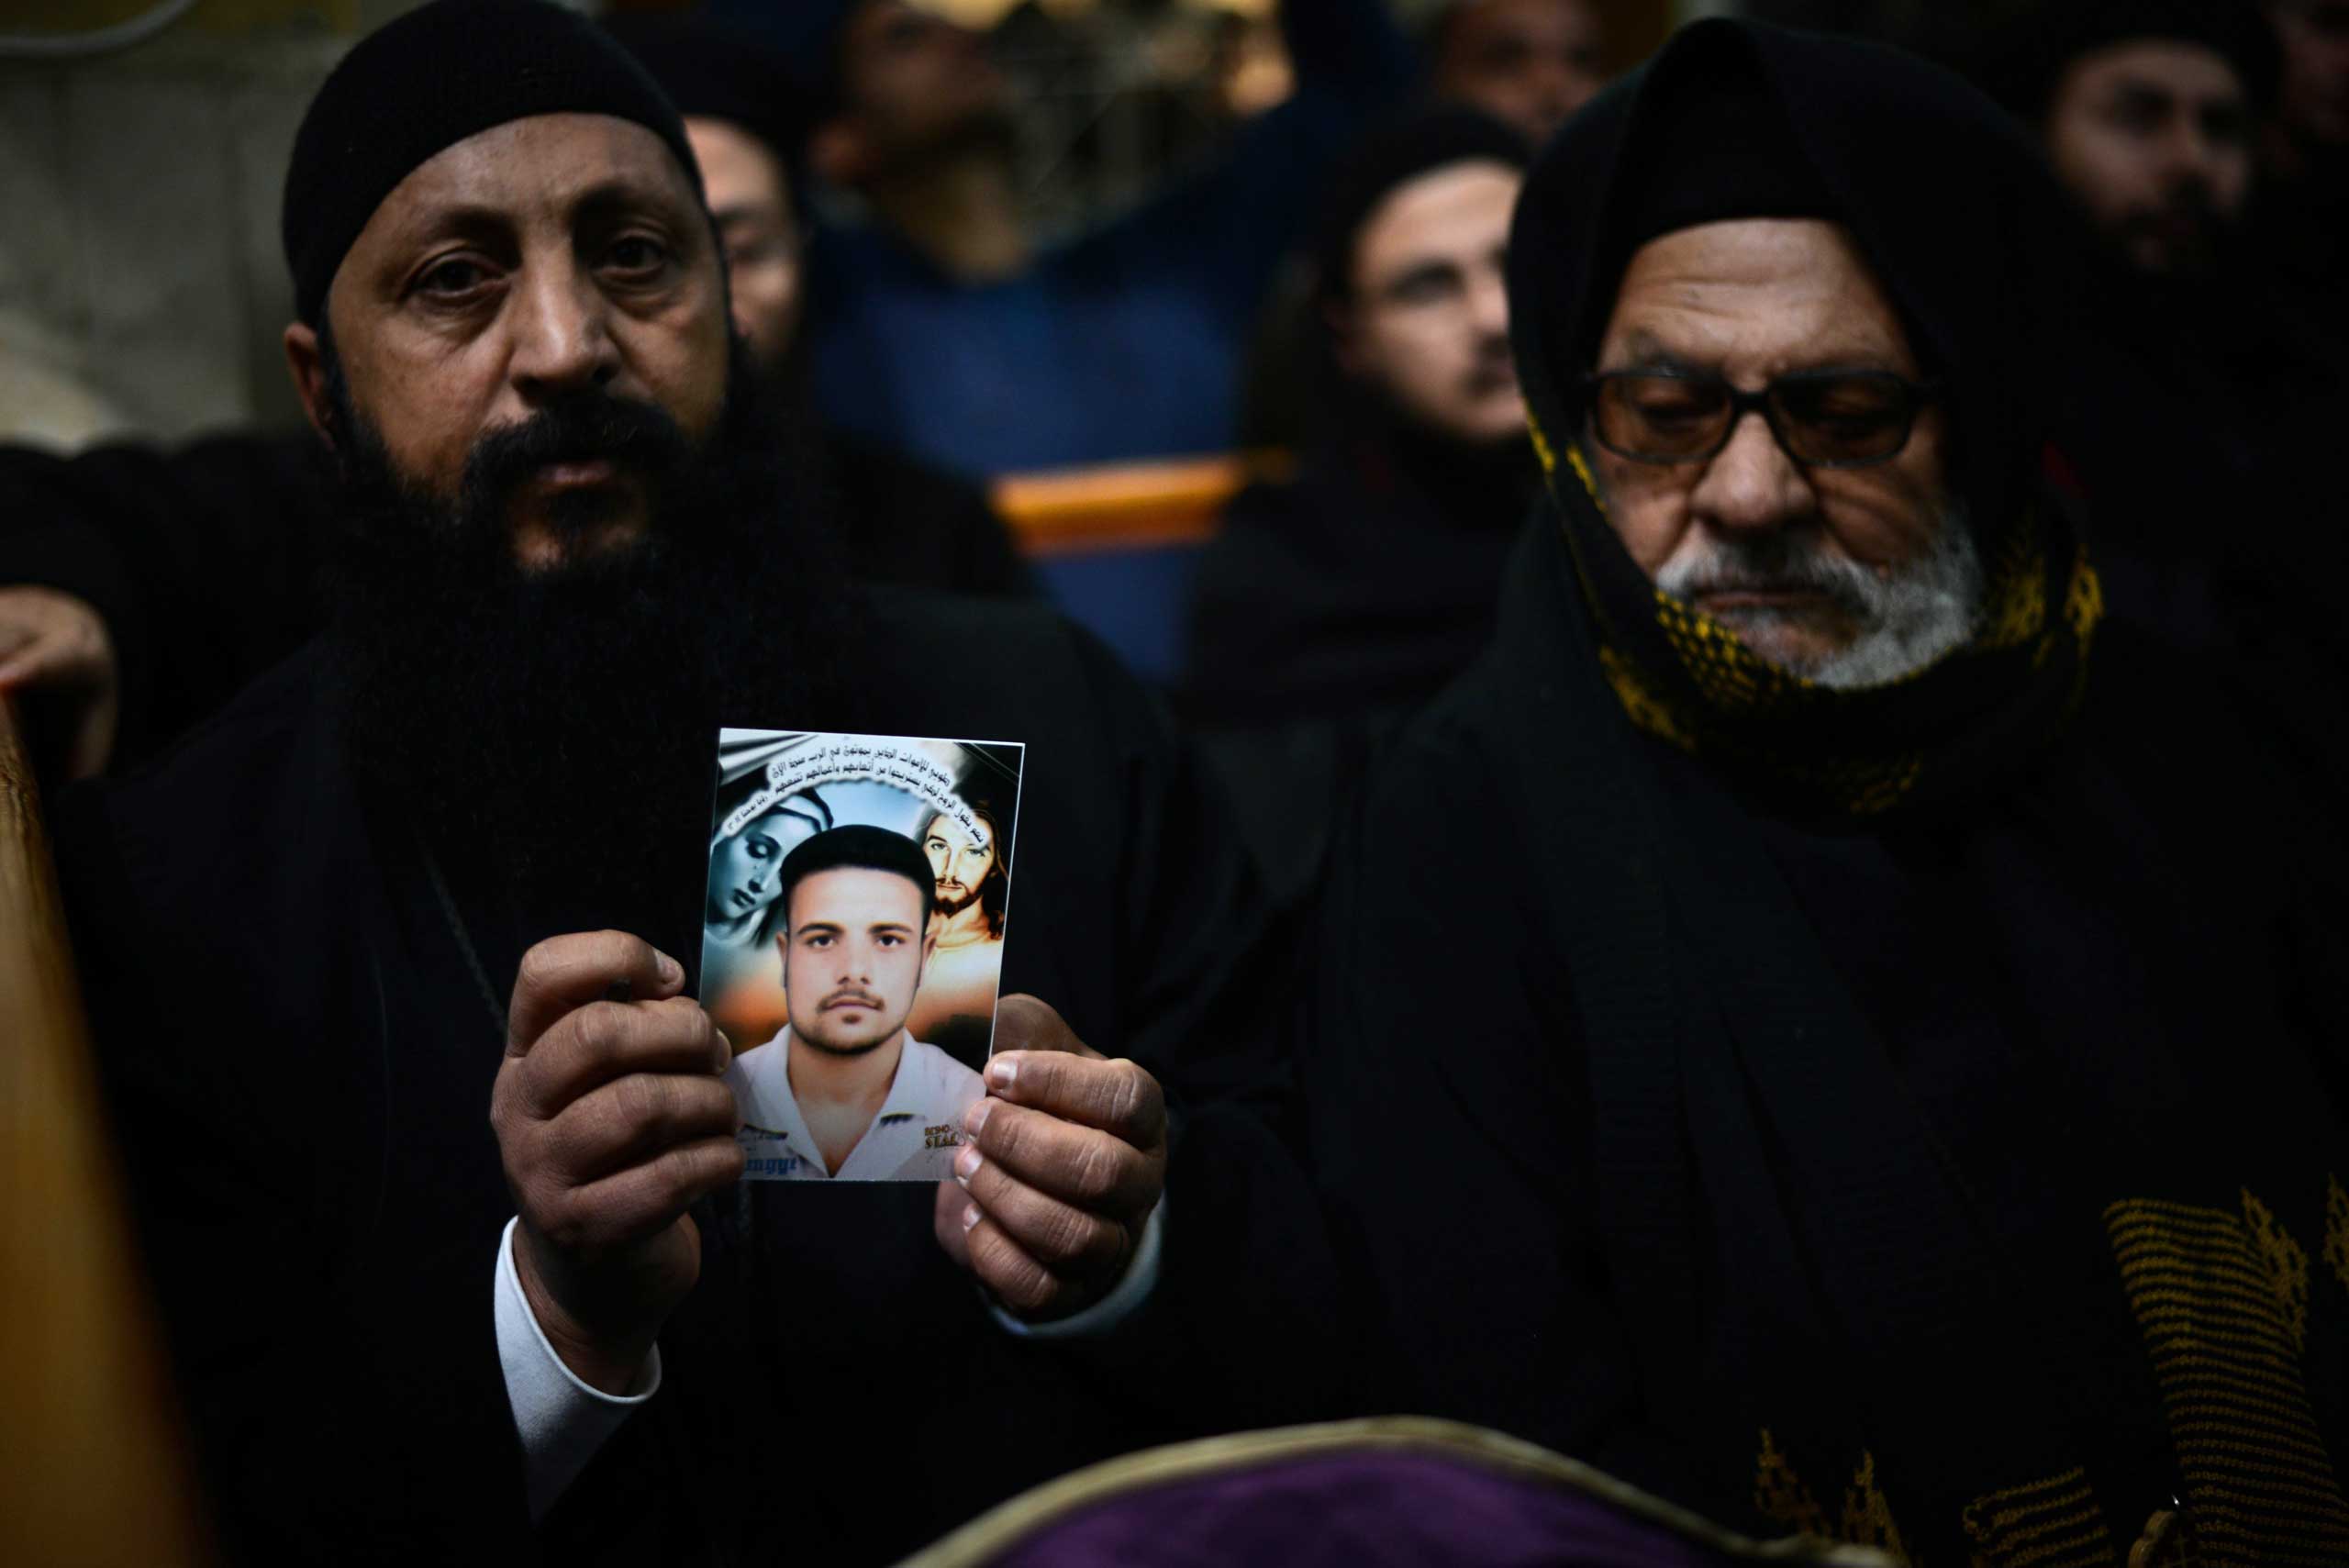 A Coptic clergyman shows a picture of a man whom he says is one of the Egyptian Coptic Christians purportedly killed by ISIS militants in Libya, on Feb. 16, 2015, during a memorial ceremony in the village of Al-Our in Egypt's southern province of Minya.